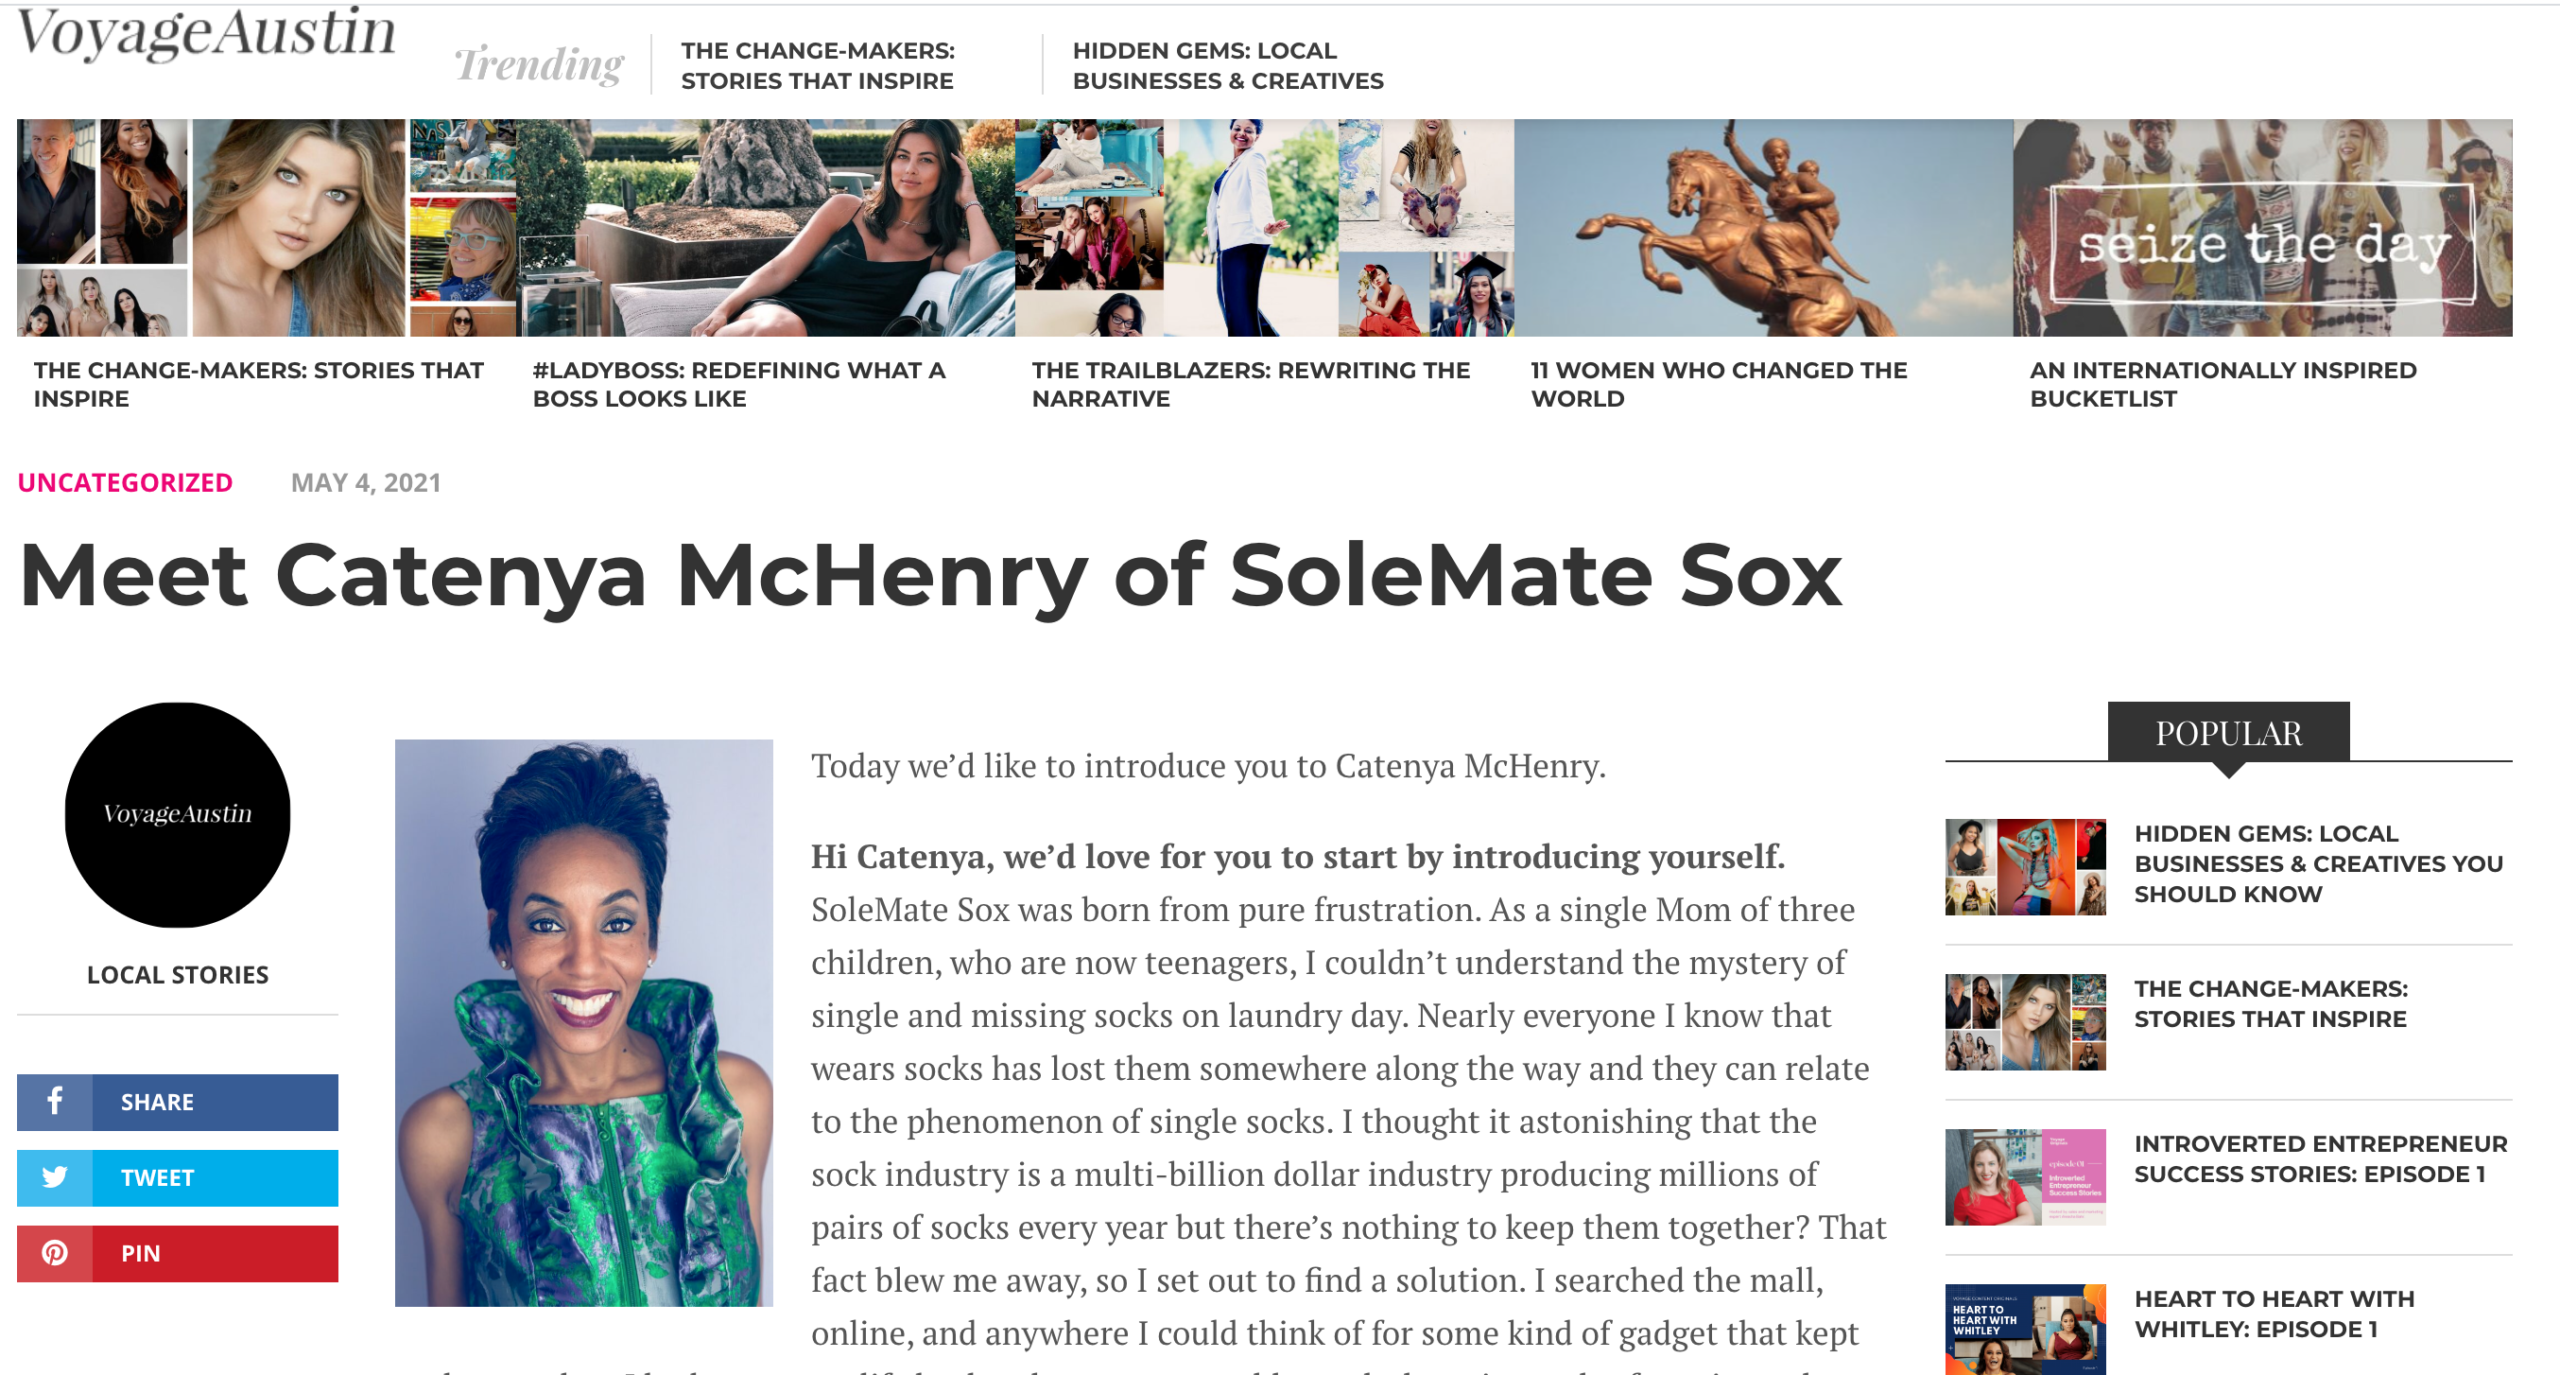 Inventor and CEO of SoleMate Sox Catenya McHenry is featured on Voyage Austin magazine.